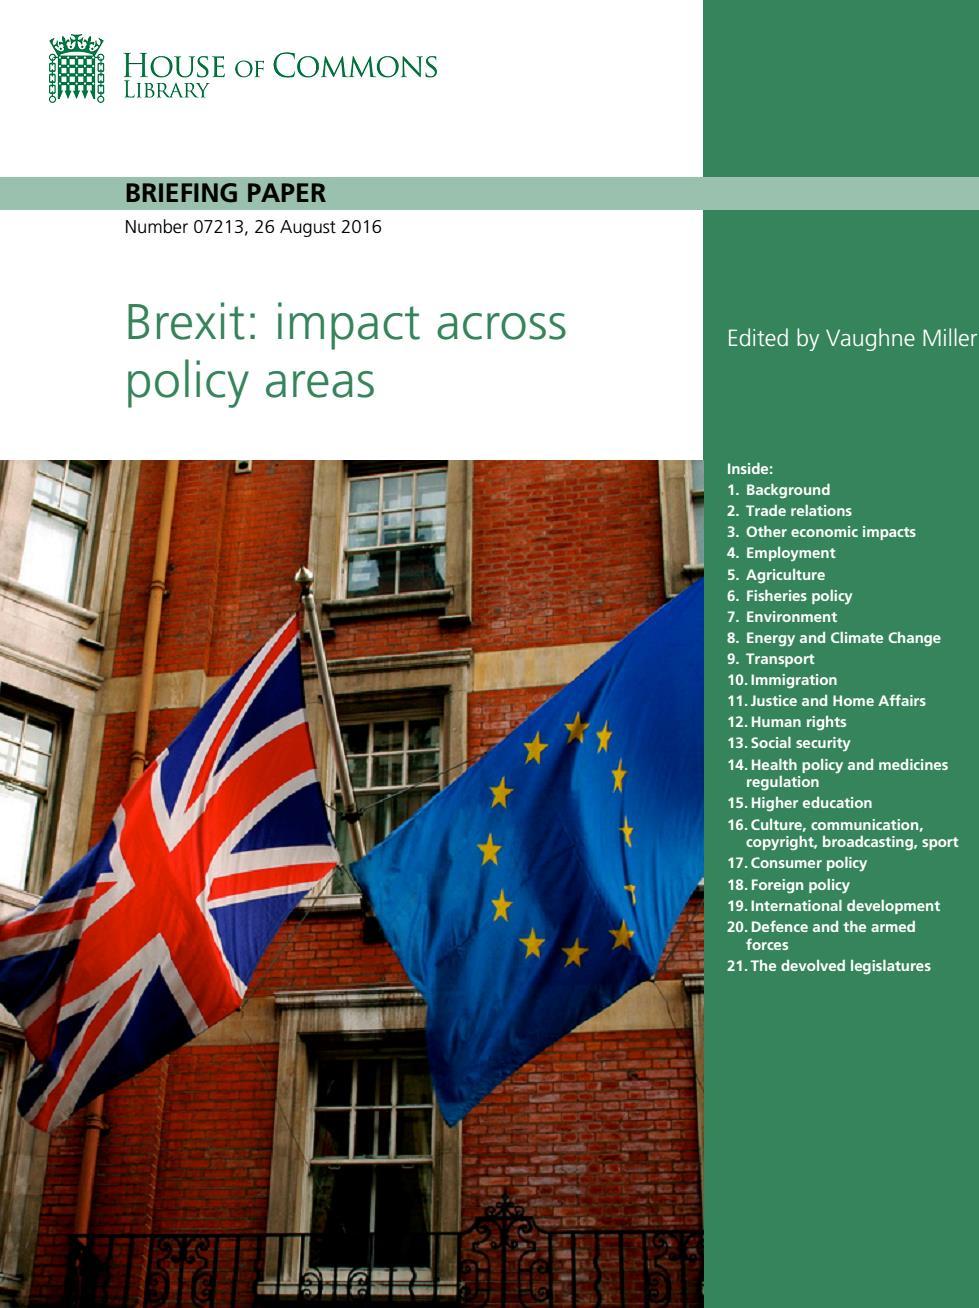 Covers 20 policy areas Most relevant to us